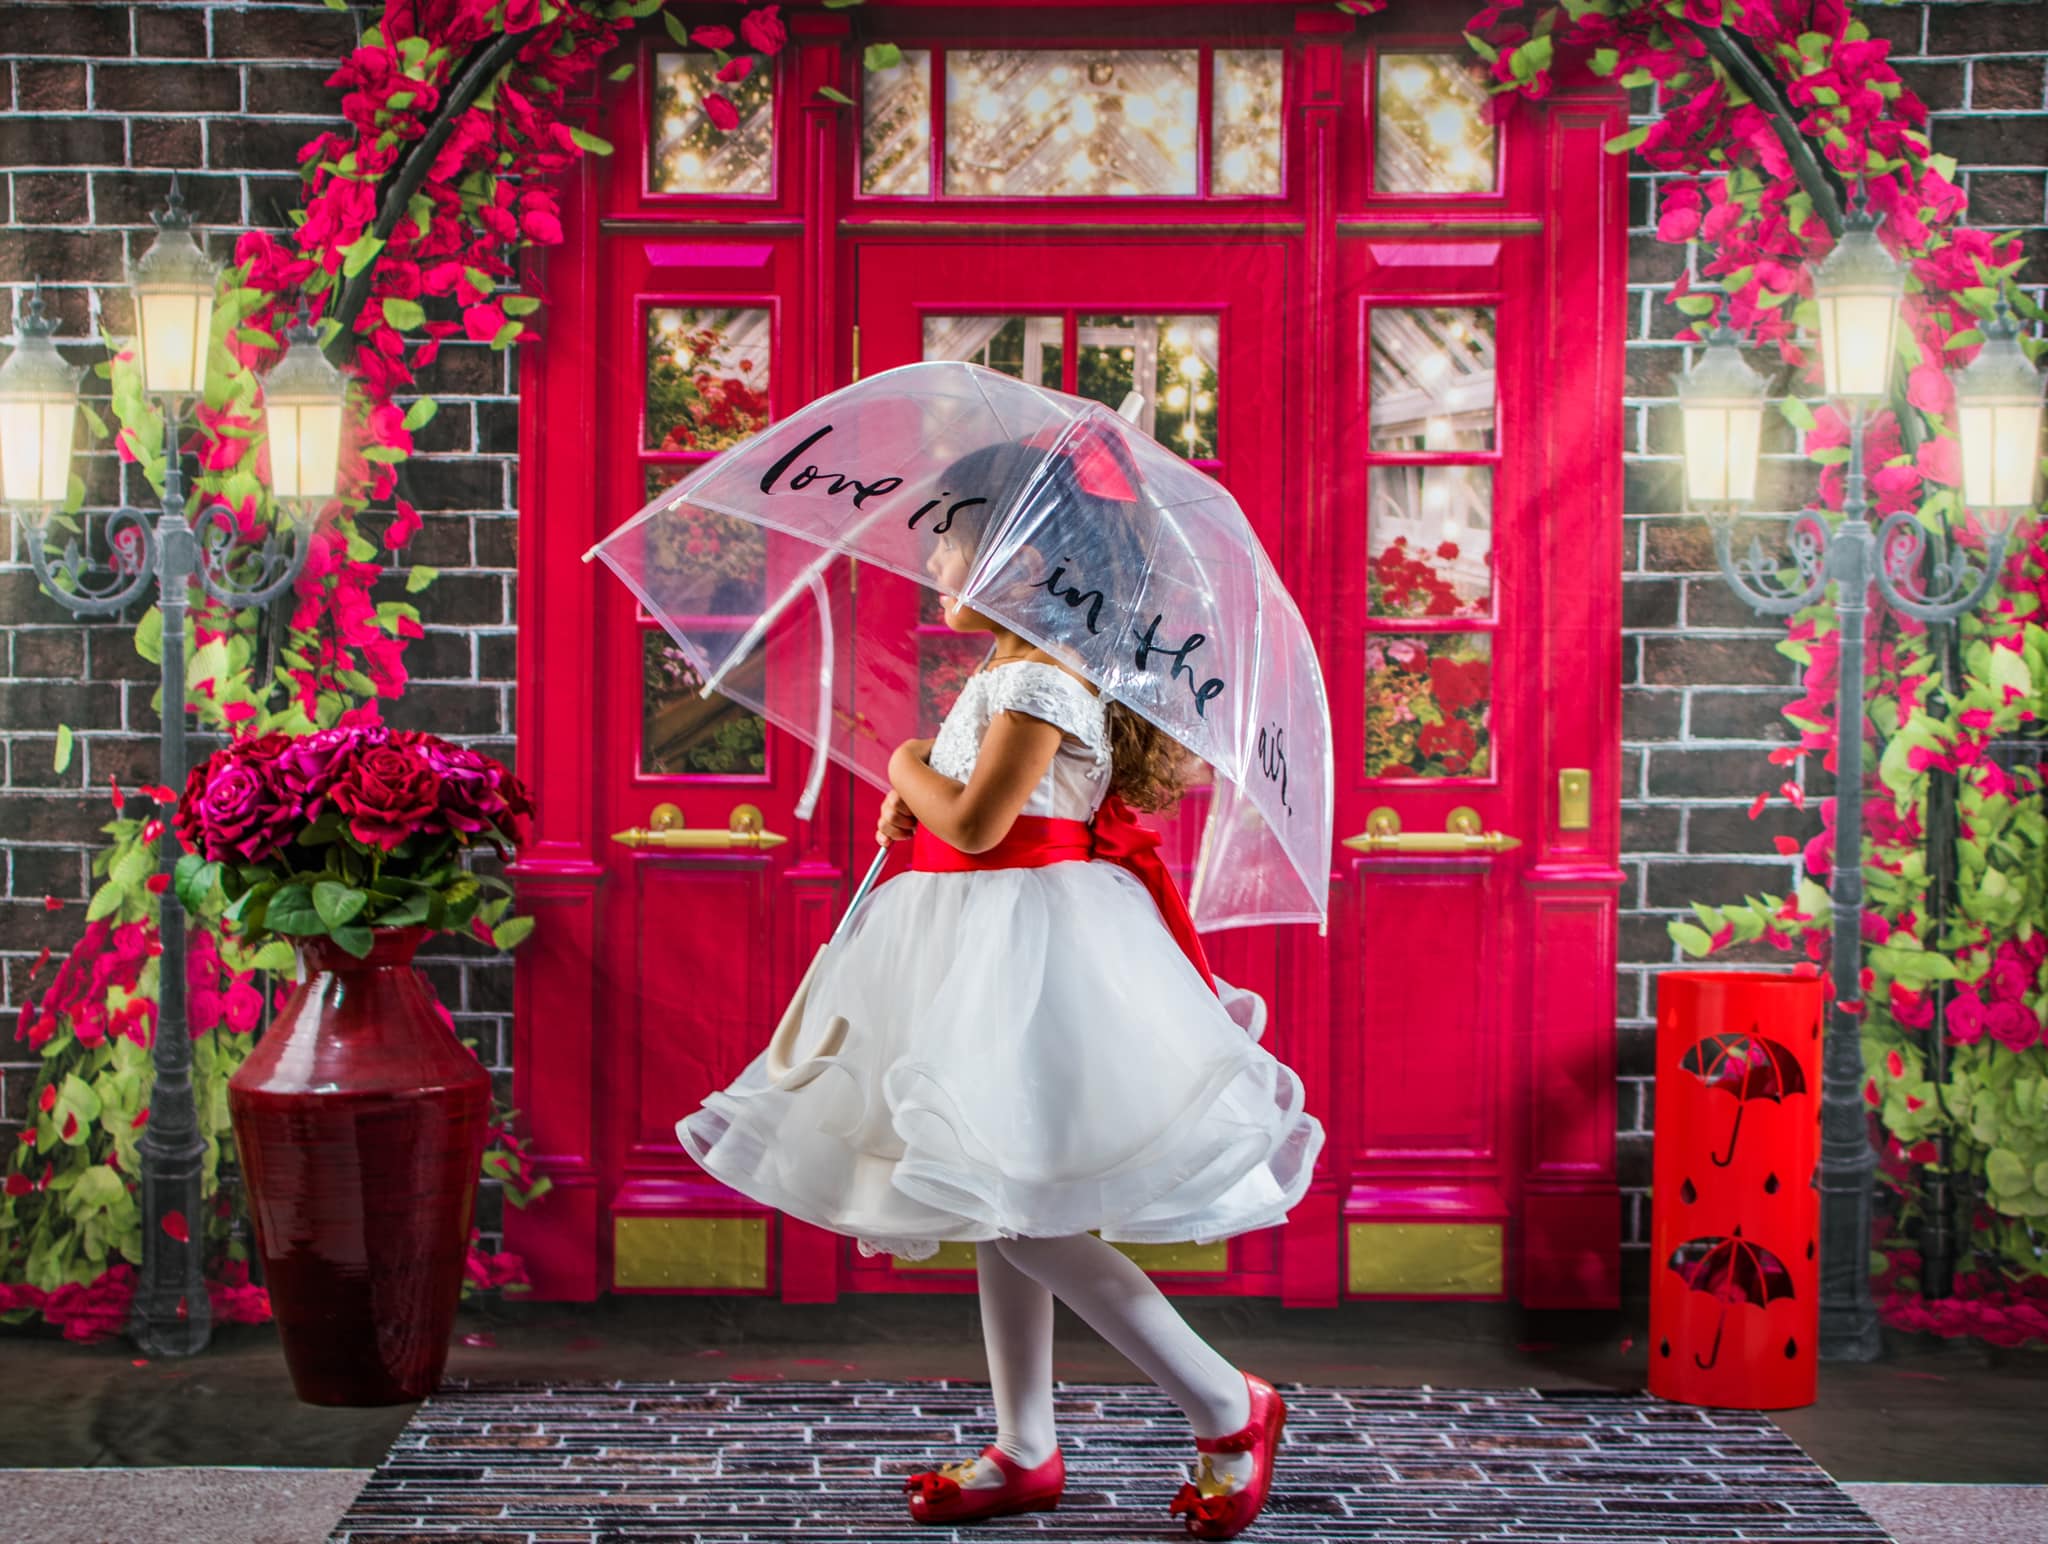 Kate Valentine's Day Store Backdrop Red for Photography